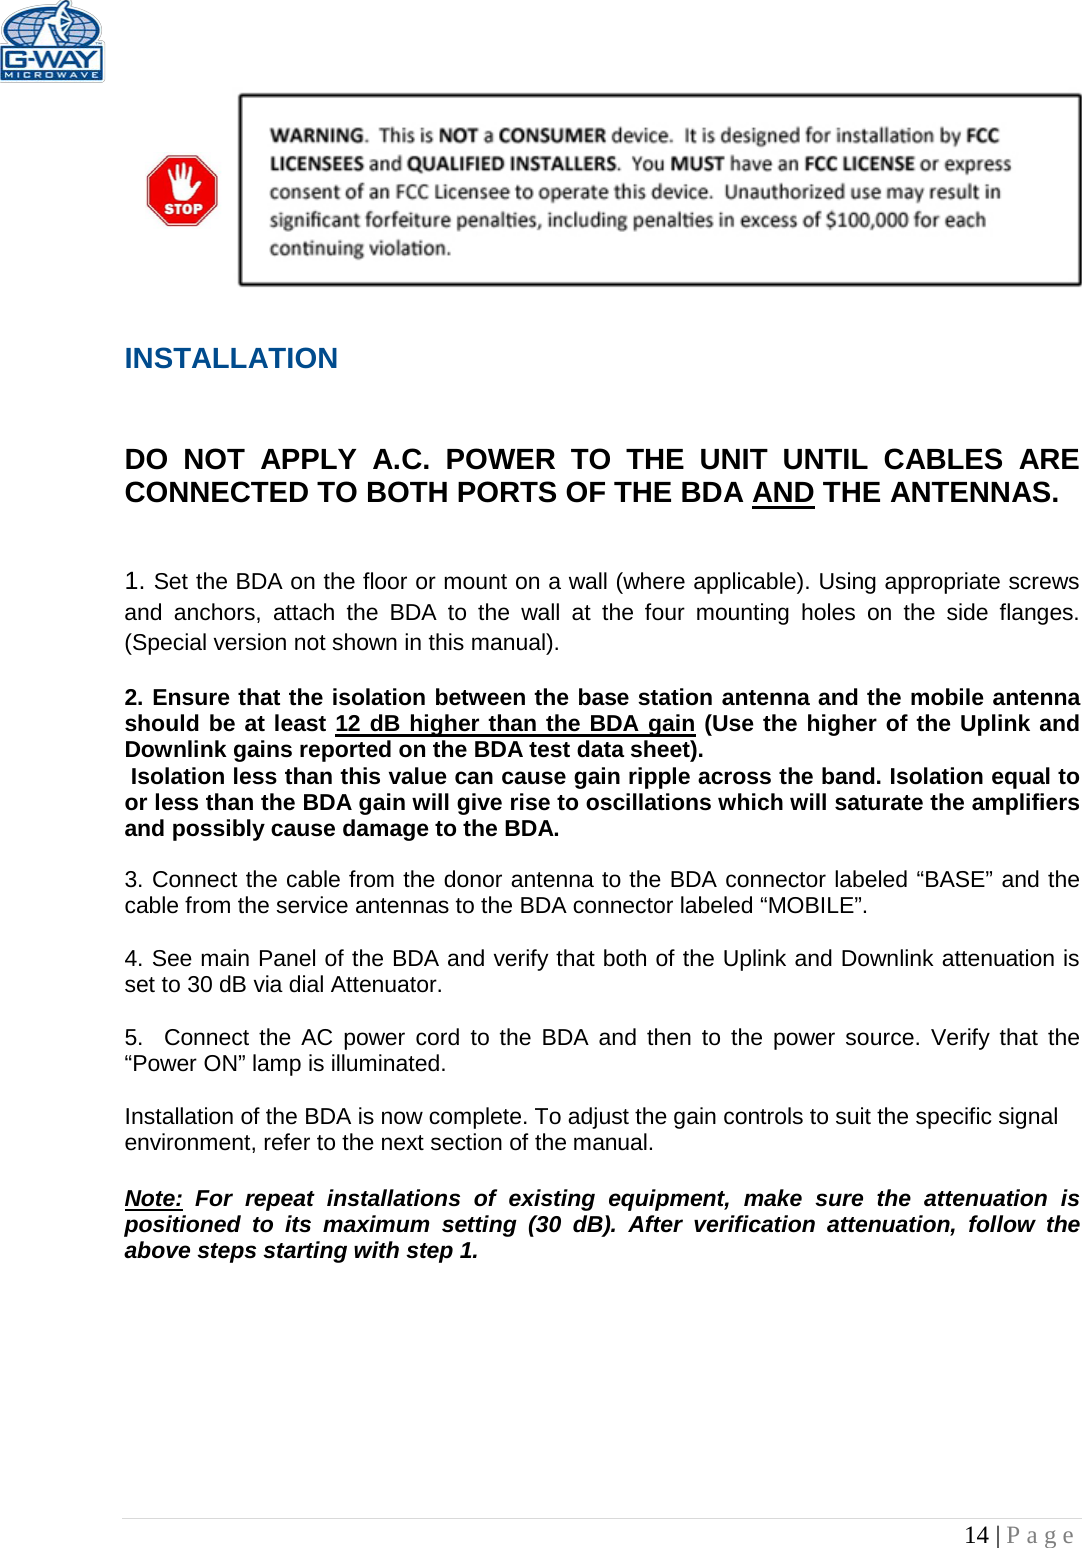   14 | Page     INSTALLATION   DO NOT APPLY A.C. POWER TO THE UNIT UNTIL CABLES ARE CONNECTED TO BOTH PORTS OF THE BDA AND THE ANTENNAS.    1. Set the BDA on the floor or mount on a wall (where applicable). Using appropriate screws and anchors, attach the BDA to the wall at the four mounting holes on the side flanges. (Special version not shown in this manual).  2. Ensure that the isolation between the base station antenna and the mobile antenna should be at least 12 dB higher than the BDA gain (Use the higher of the Uplink and Downlink gains reported on the BDA test data sheet).  Isolation less than this value can cause gain ripple across the band. Isolation equal to or less than the BDA gain will give rise to oscillations which will saturate the amplifiers and possibly cause damage to the BDA.   3. Connect the cable from the donor antenna to the BDA connector labeled “BASE” and the cable from the service antennas to the BDA connector labeled “MOBILE”.  4. See main Panel of the BDA and verify that both of the Uplink and Downlink attenuation is set to 30 dB via dial Attenuator.    5.  Connect the AC power cord to the BDA and then to the power source. Verify that the “Power ON” lamp is illuminated.   Installation of the BDA is now complete. To adjust the gain controls to suit the specific signal environment, refer to the next section of the manual.  Note: For repeat installations of existing equipment, make sure the attenuation is positioned to its maximum setting (30 dB). After verification attenuation, follow the above steps starting with step 1.      